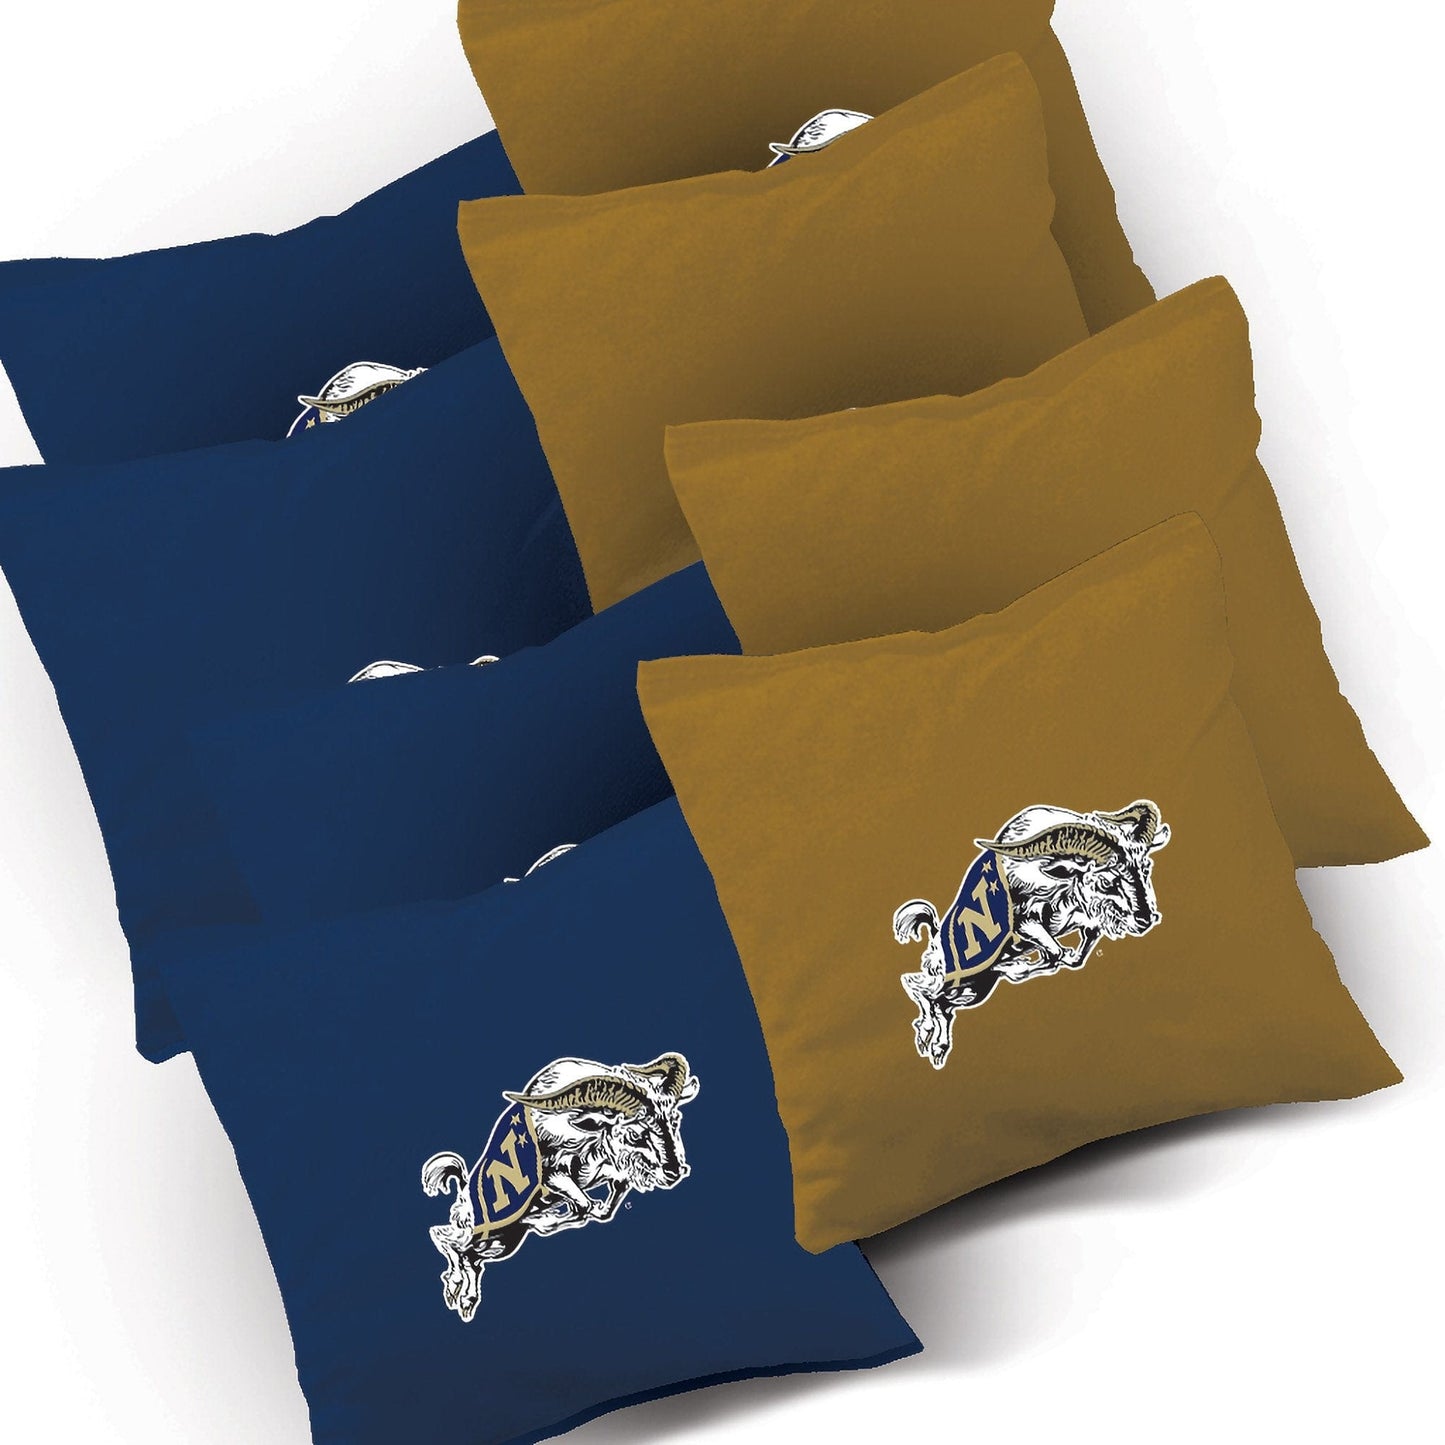 Navy Stained Pyramid team logo bags